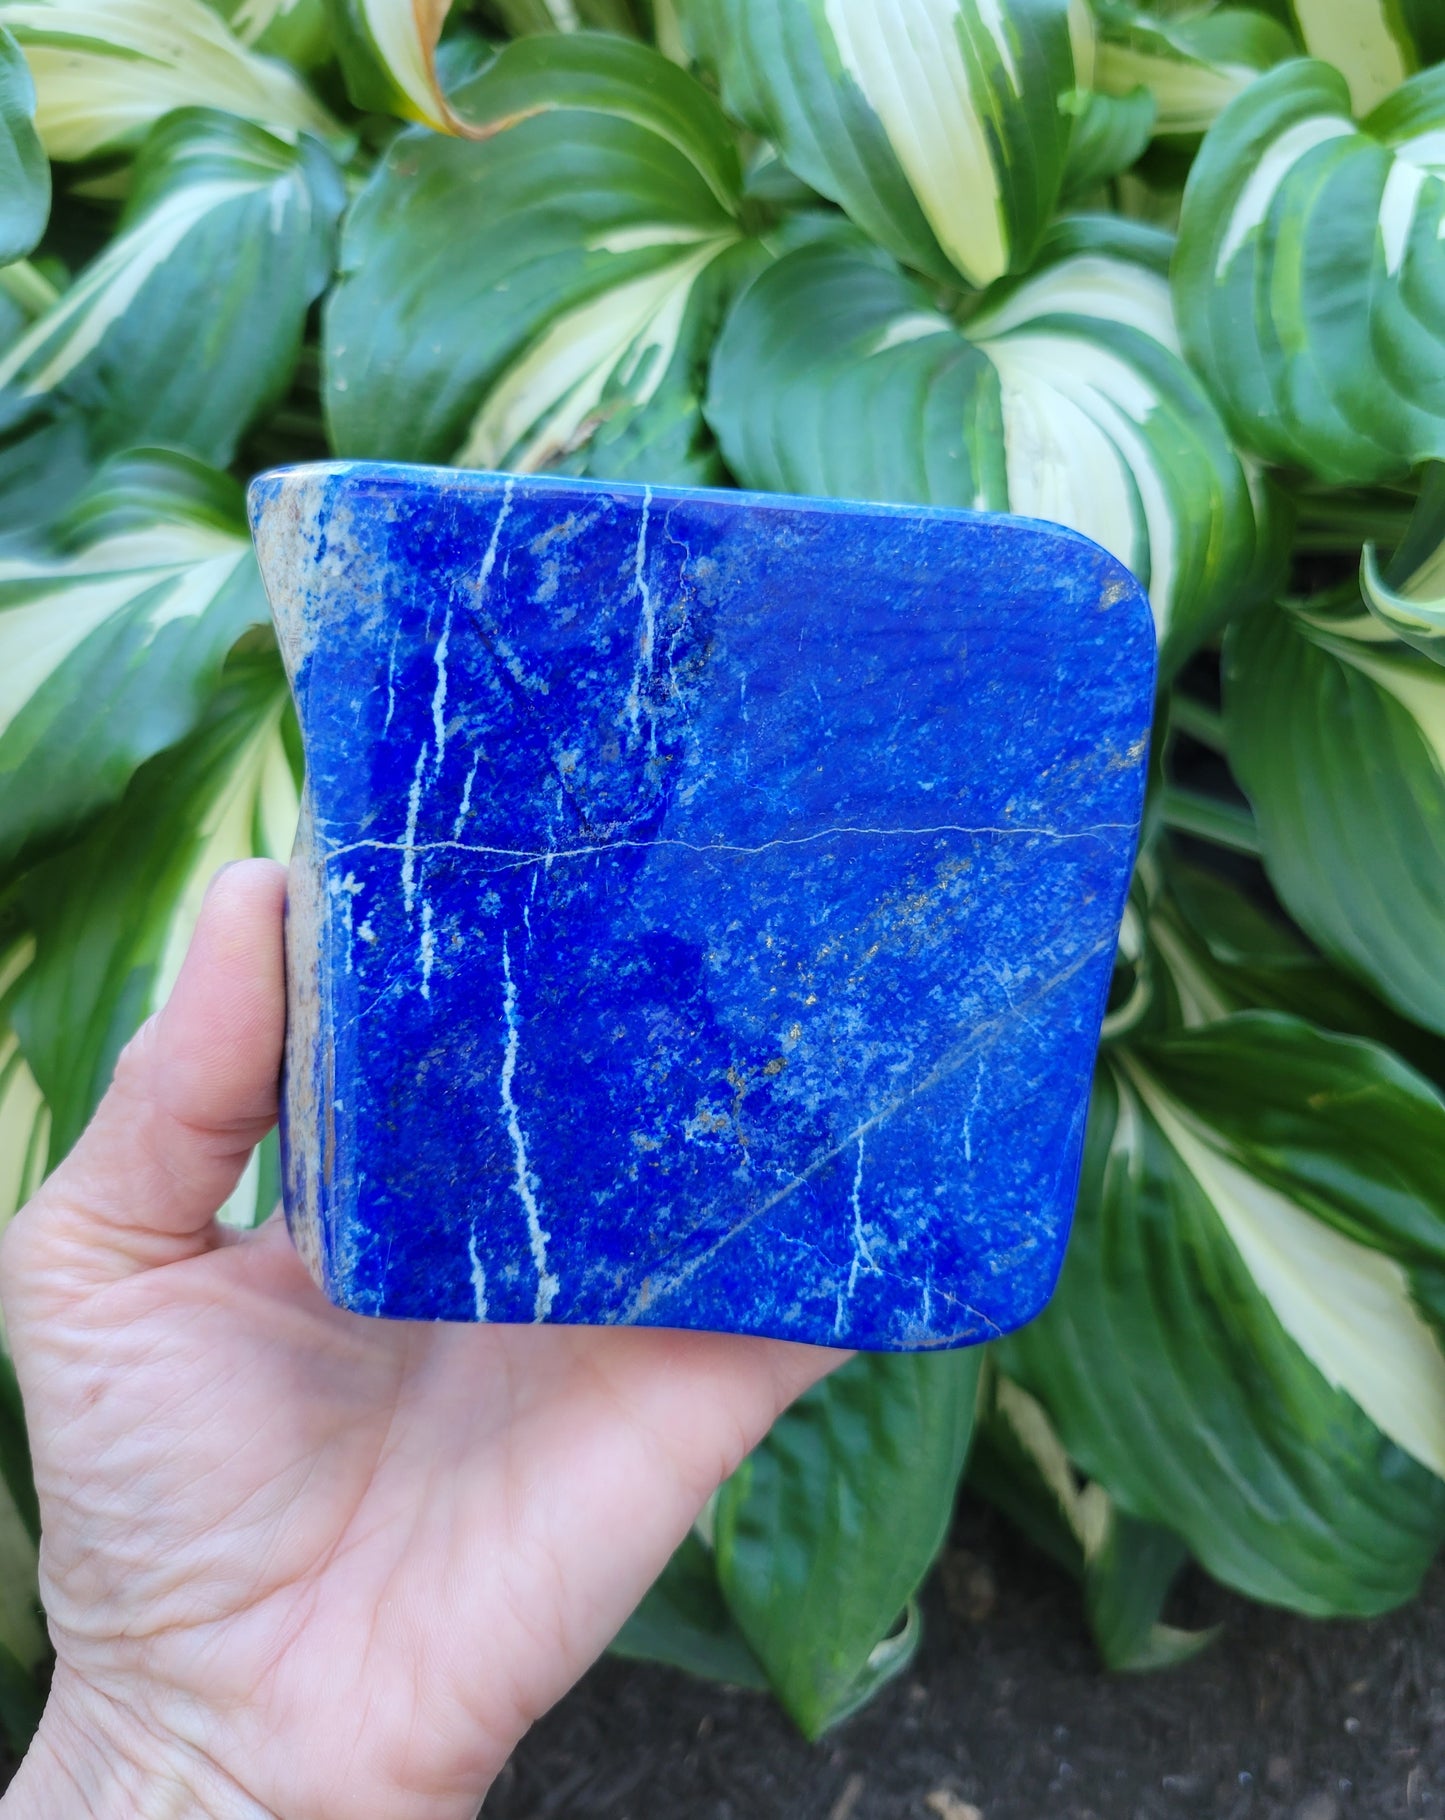 Lapis Lazuli Polished Free Form Sculpture from Pakistan (W 4 X D 7/8 X H 3 5/8 inches)